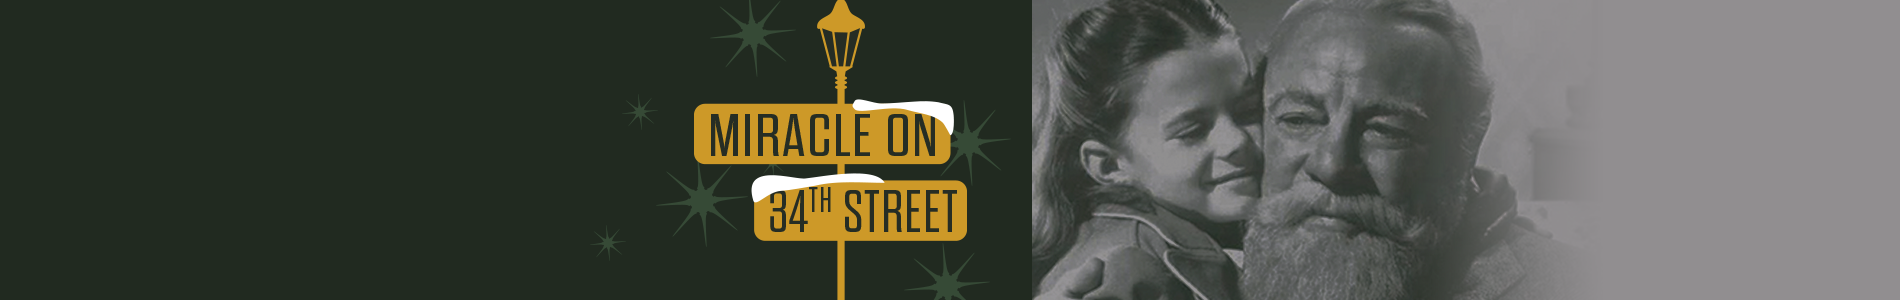 Miracle on 34th St at the Polk Theatre - Isaac Hartmann Event